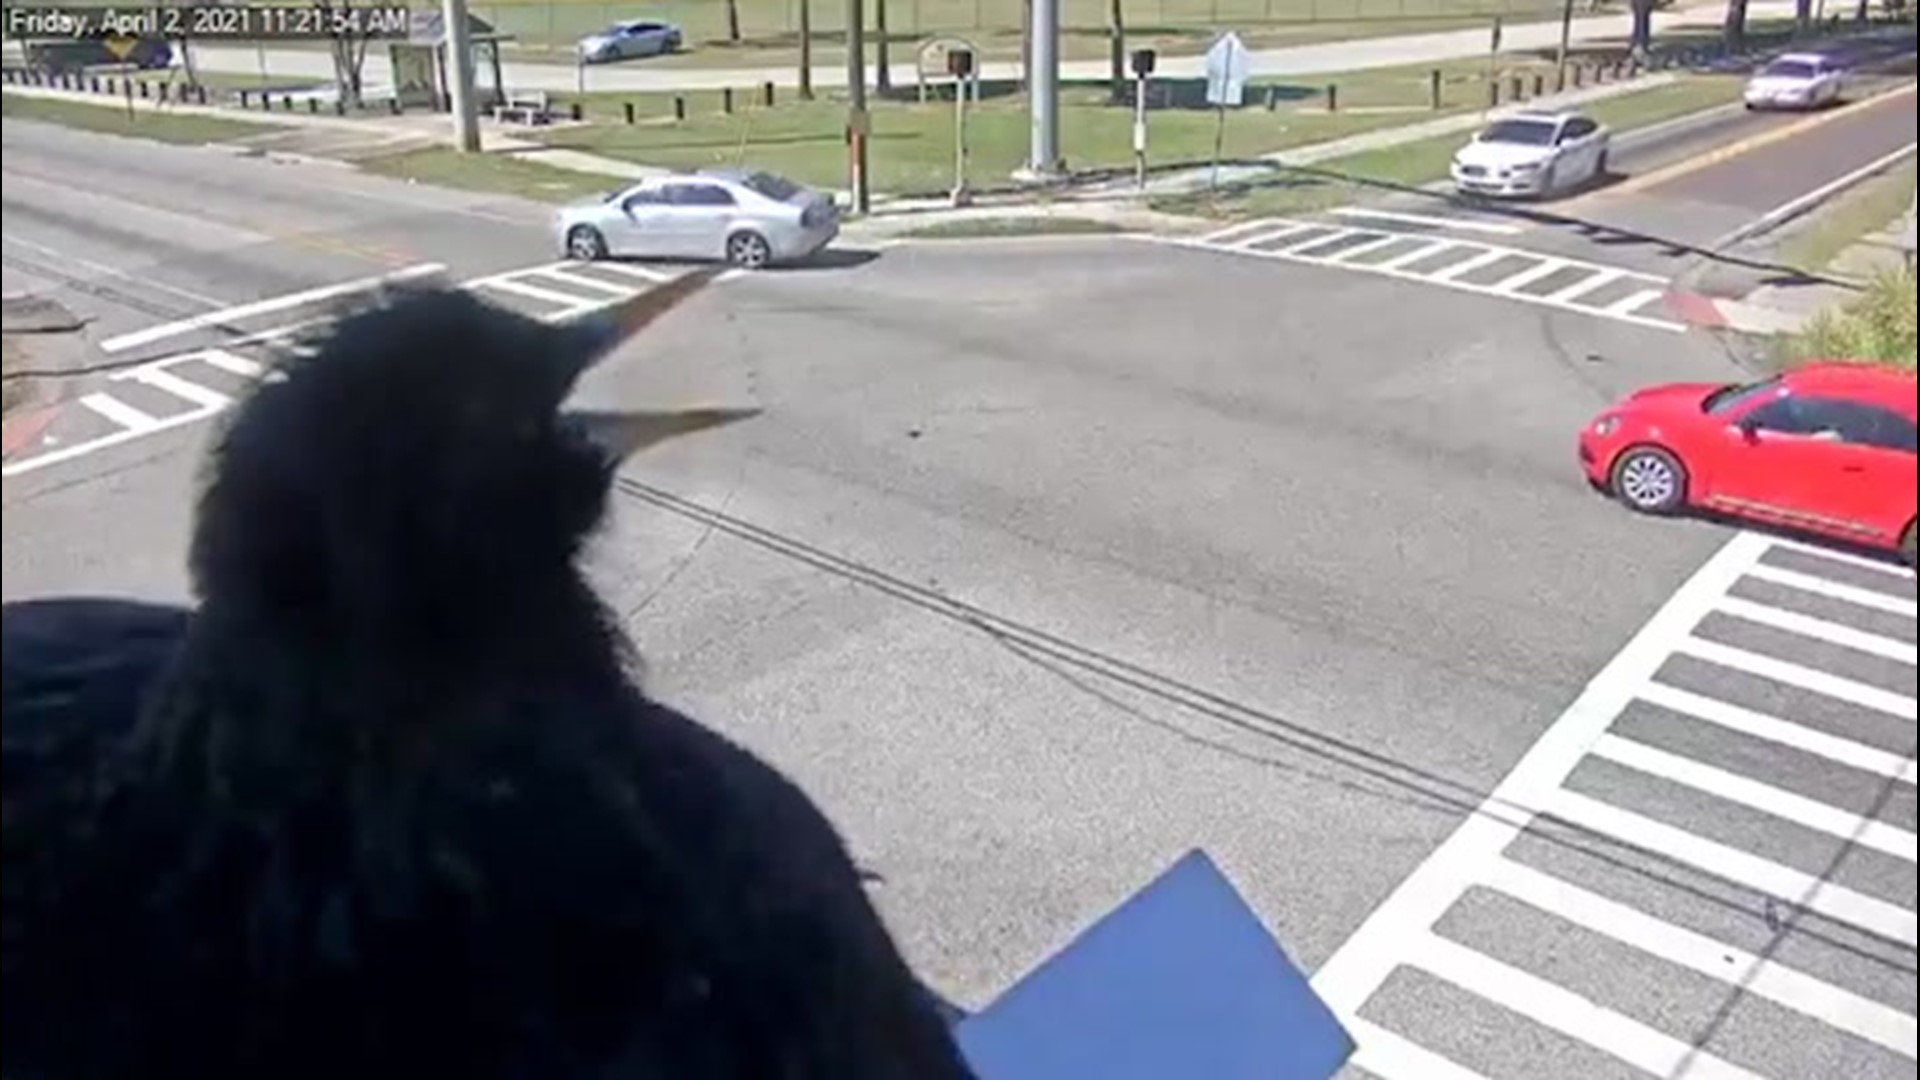 This security camera gives a literal bird's-eye view of traffic in Hillsborough, Florida, on April 2. A bird perched right next to the camera is observing the world go by.